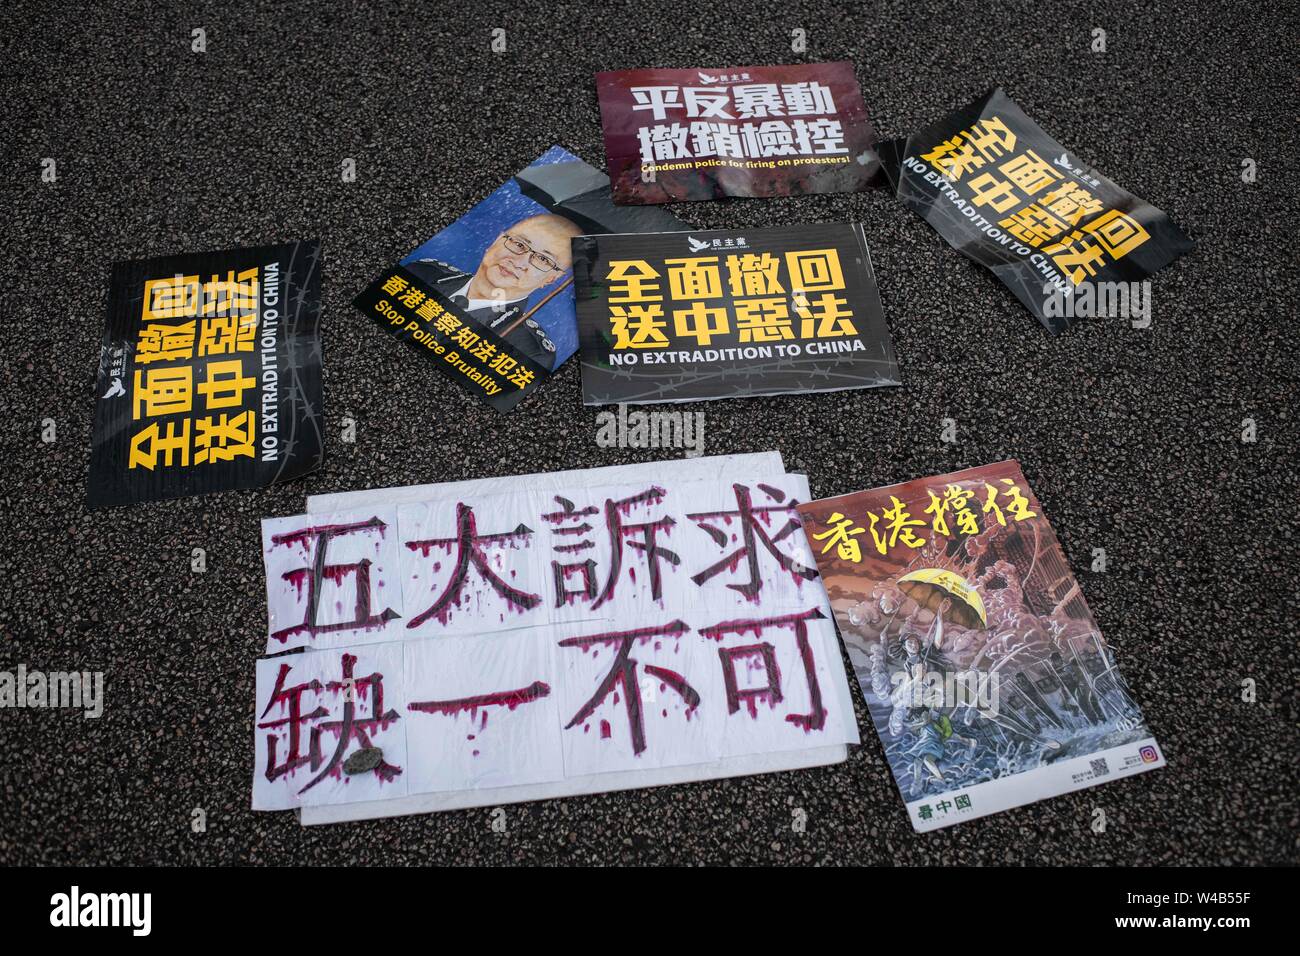 Poster with messages against the extradition bill and pro-democracy on the floor in front of Legislative Council.  Hong Kong demonstrators gathered for another weekend of protests against the controversial extradition bill and with a growing list of grievances, maintaining pressure on Chief Executive Carrie Lam. Stock Photo